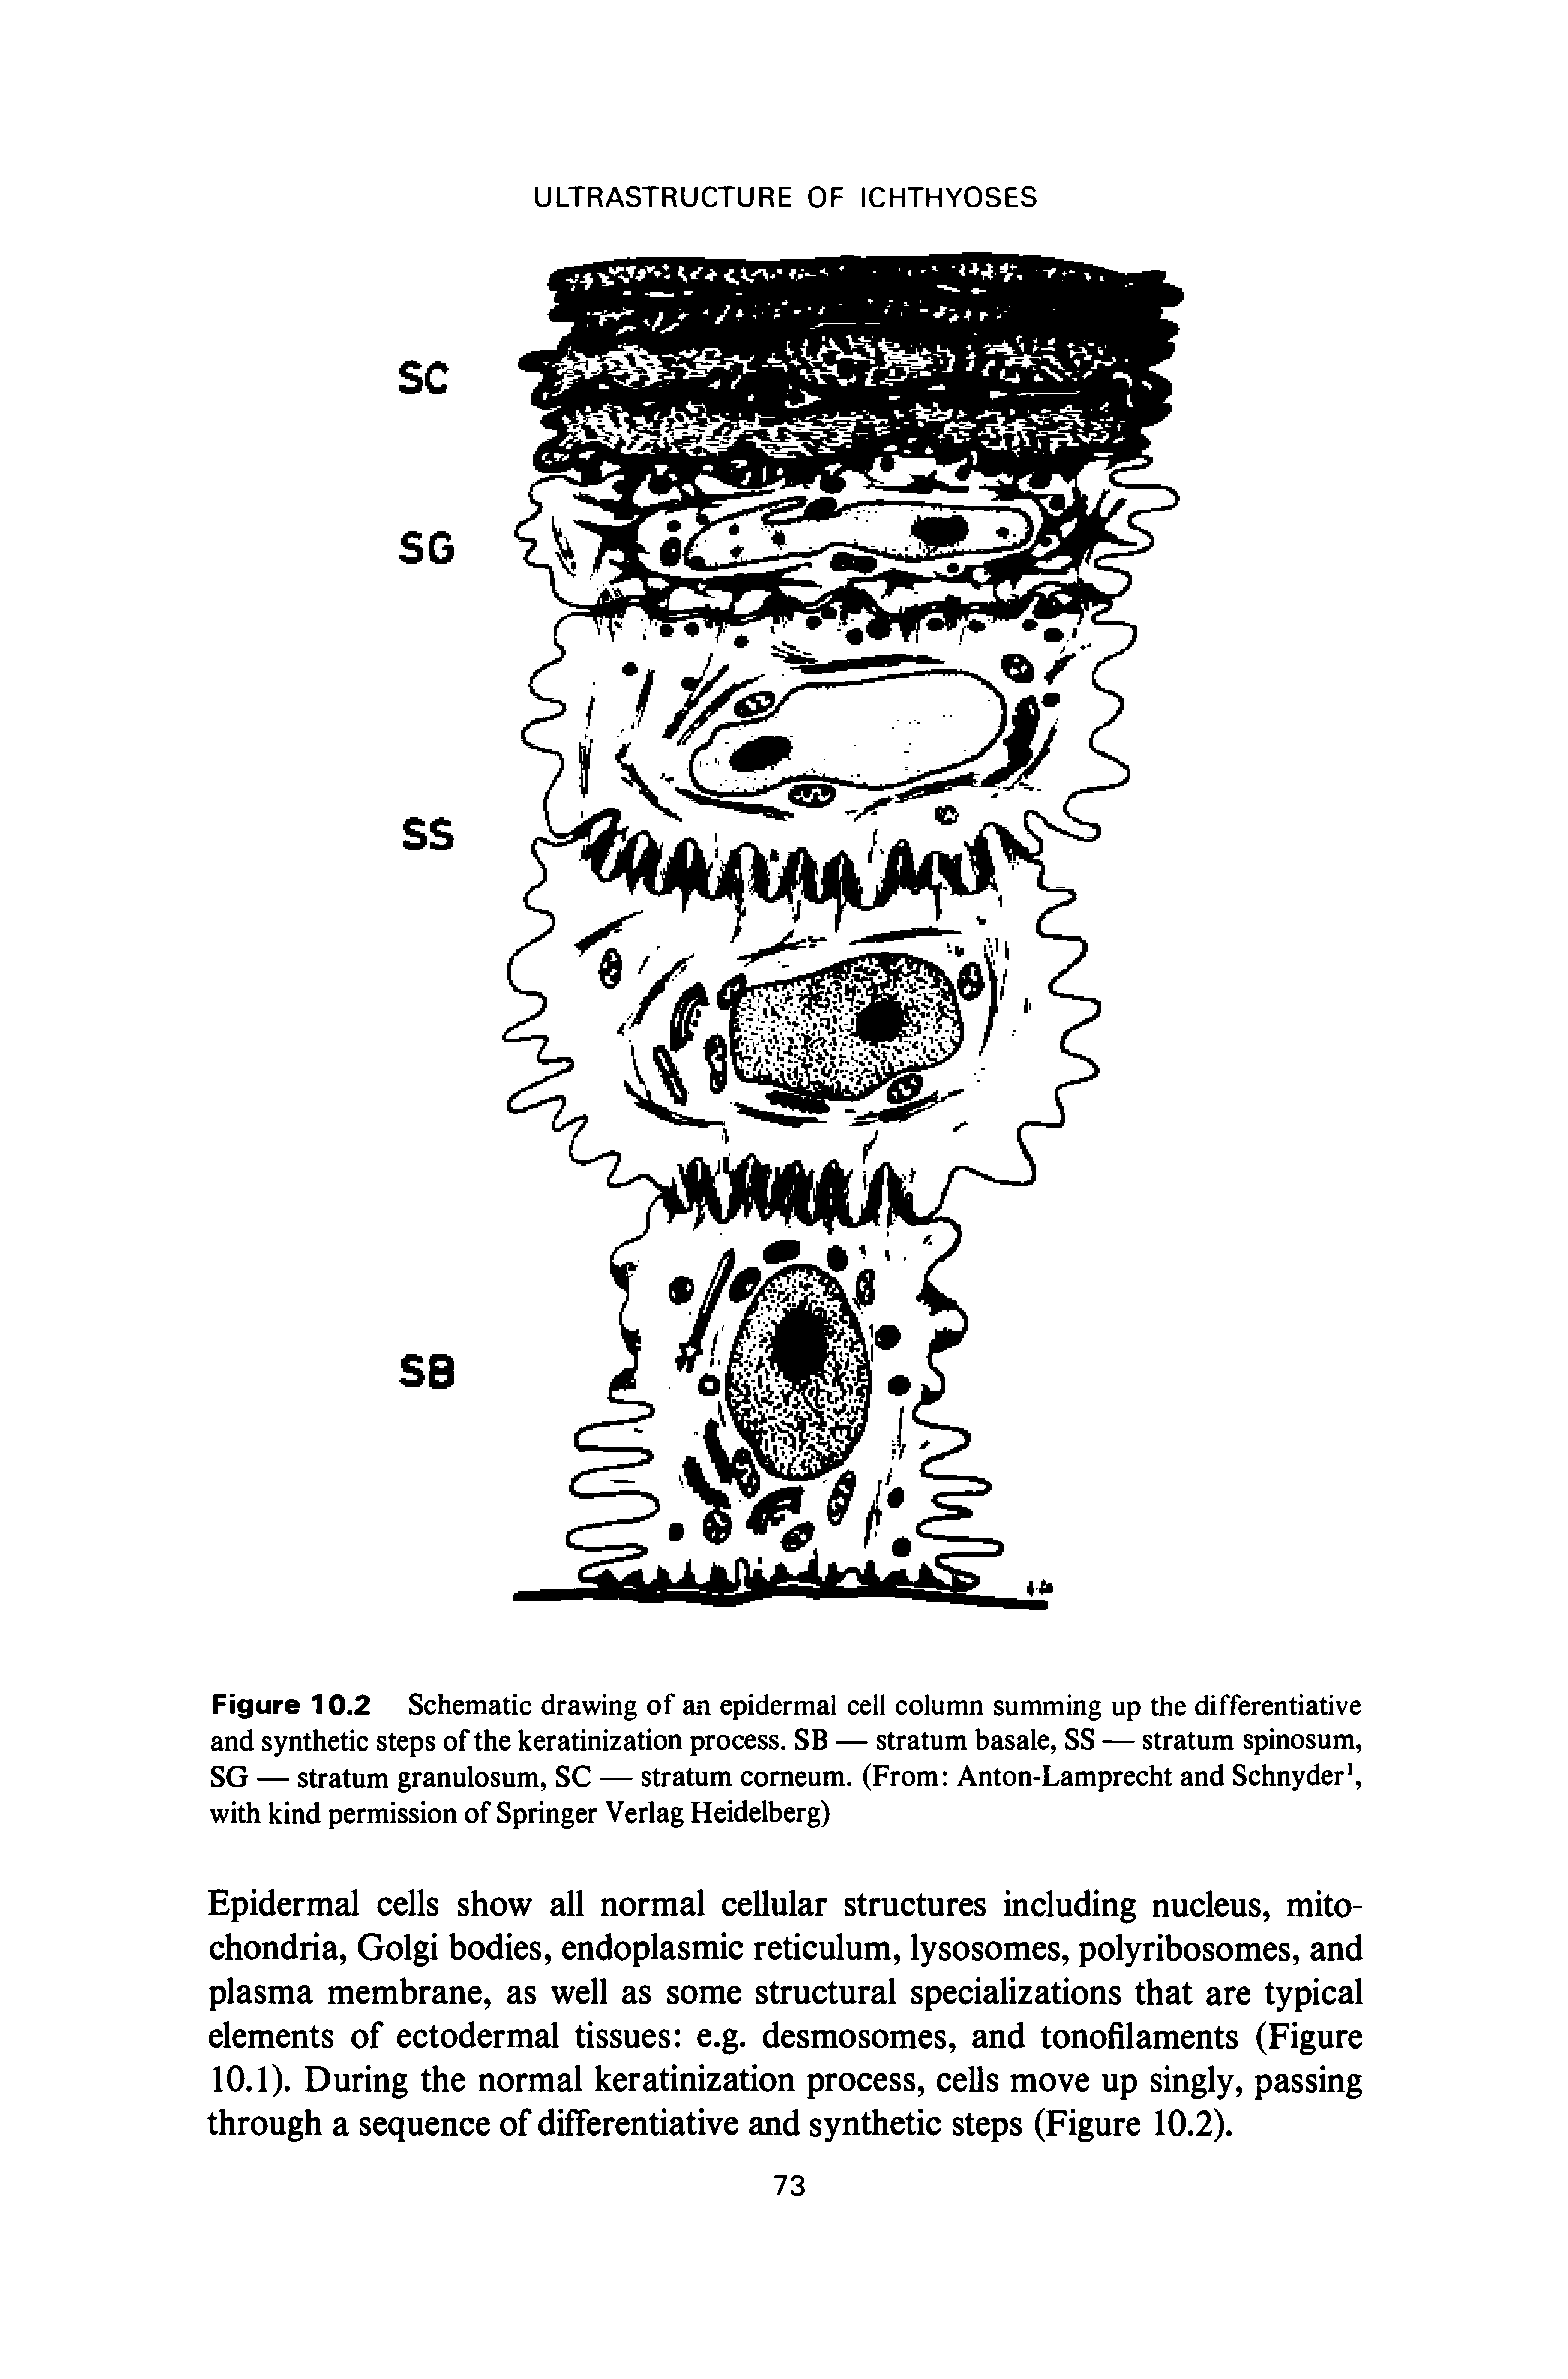 Figure 10.2 Schematic drawing of an epidermal cell column summing up the differentiative and synthetic steps of the keratinization process. SB — stratum basale, SS — stratum spinosum, SG — stratum granulosum, SC — stratum corneum. (From Anton-Lamprecht and Schnyder , with kind permission of Springer Verlag Heidelberg)...